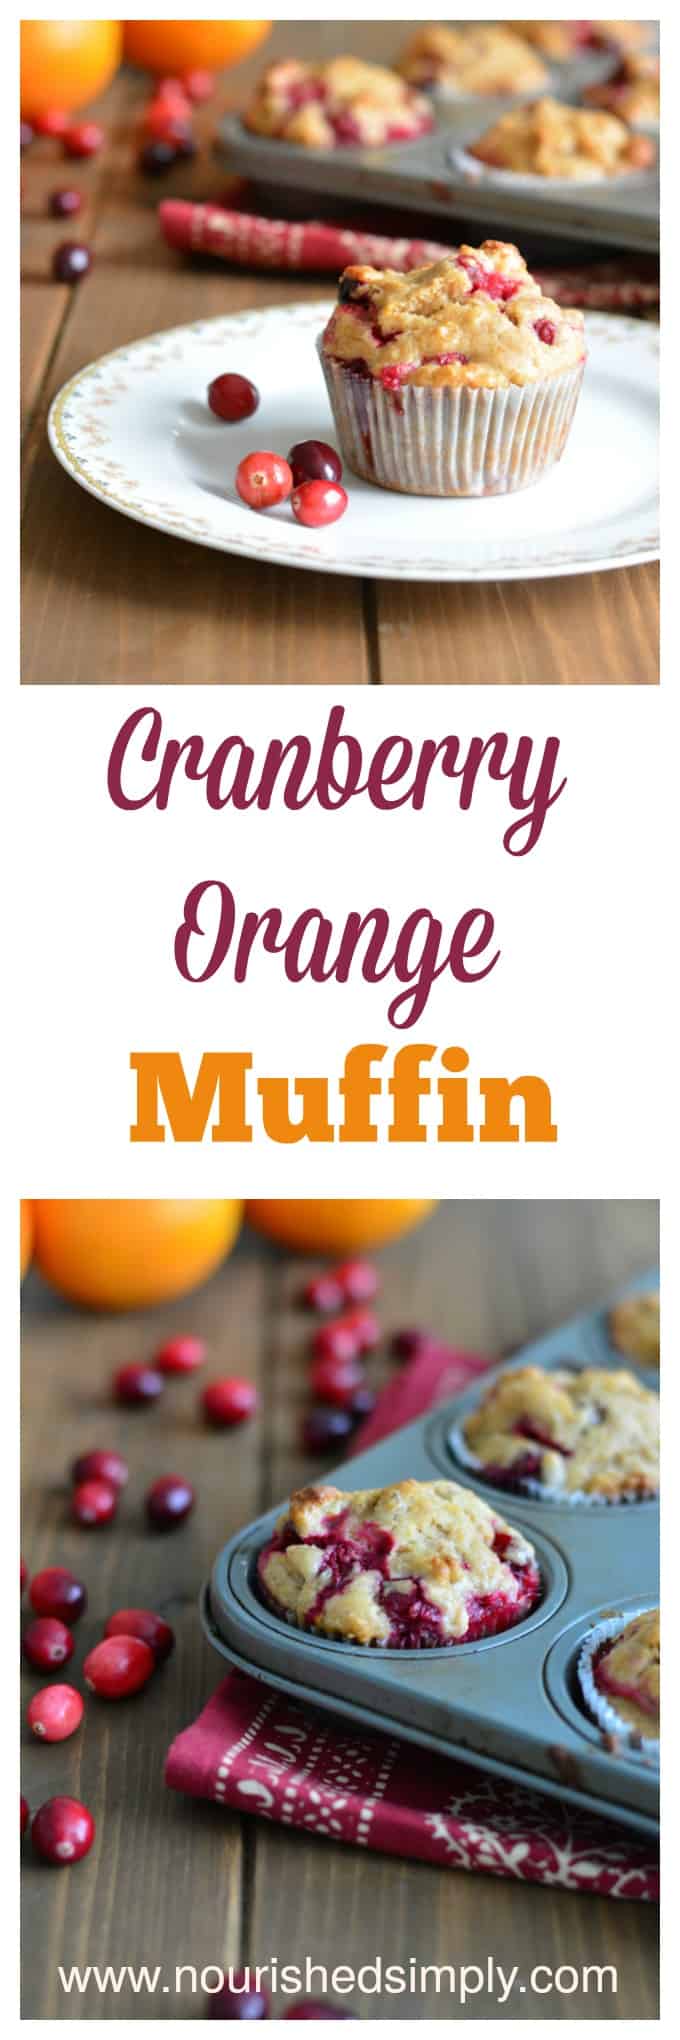 Cranberry Orange Muffin made with fresh cranberries and orange zest are perfect for the holidays.